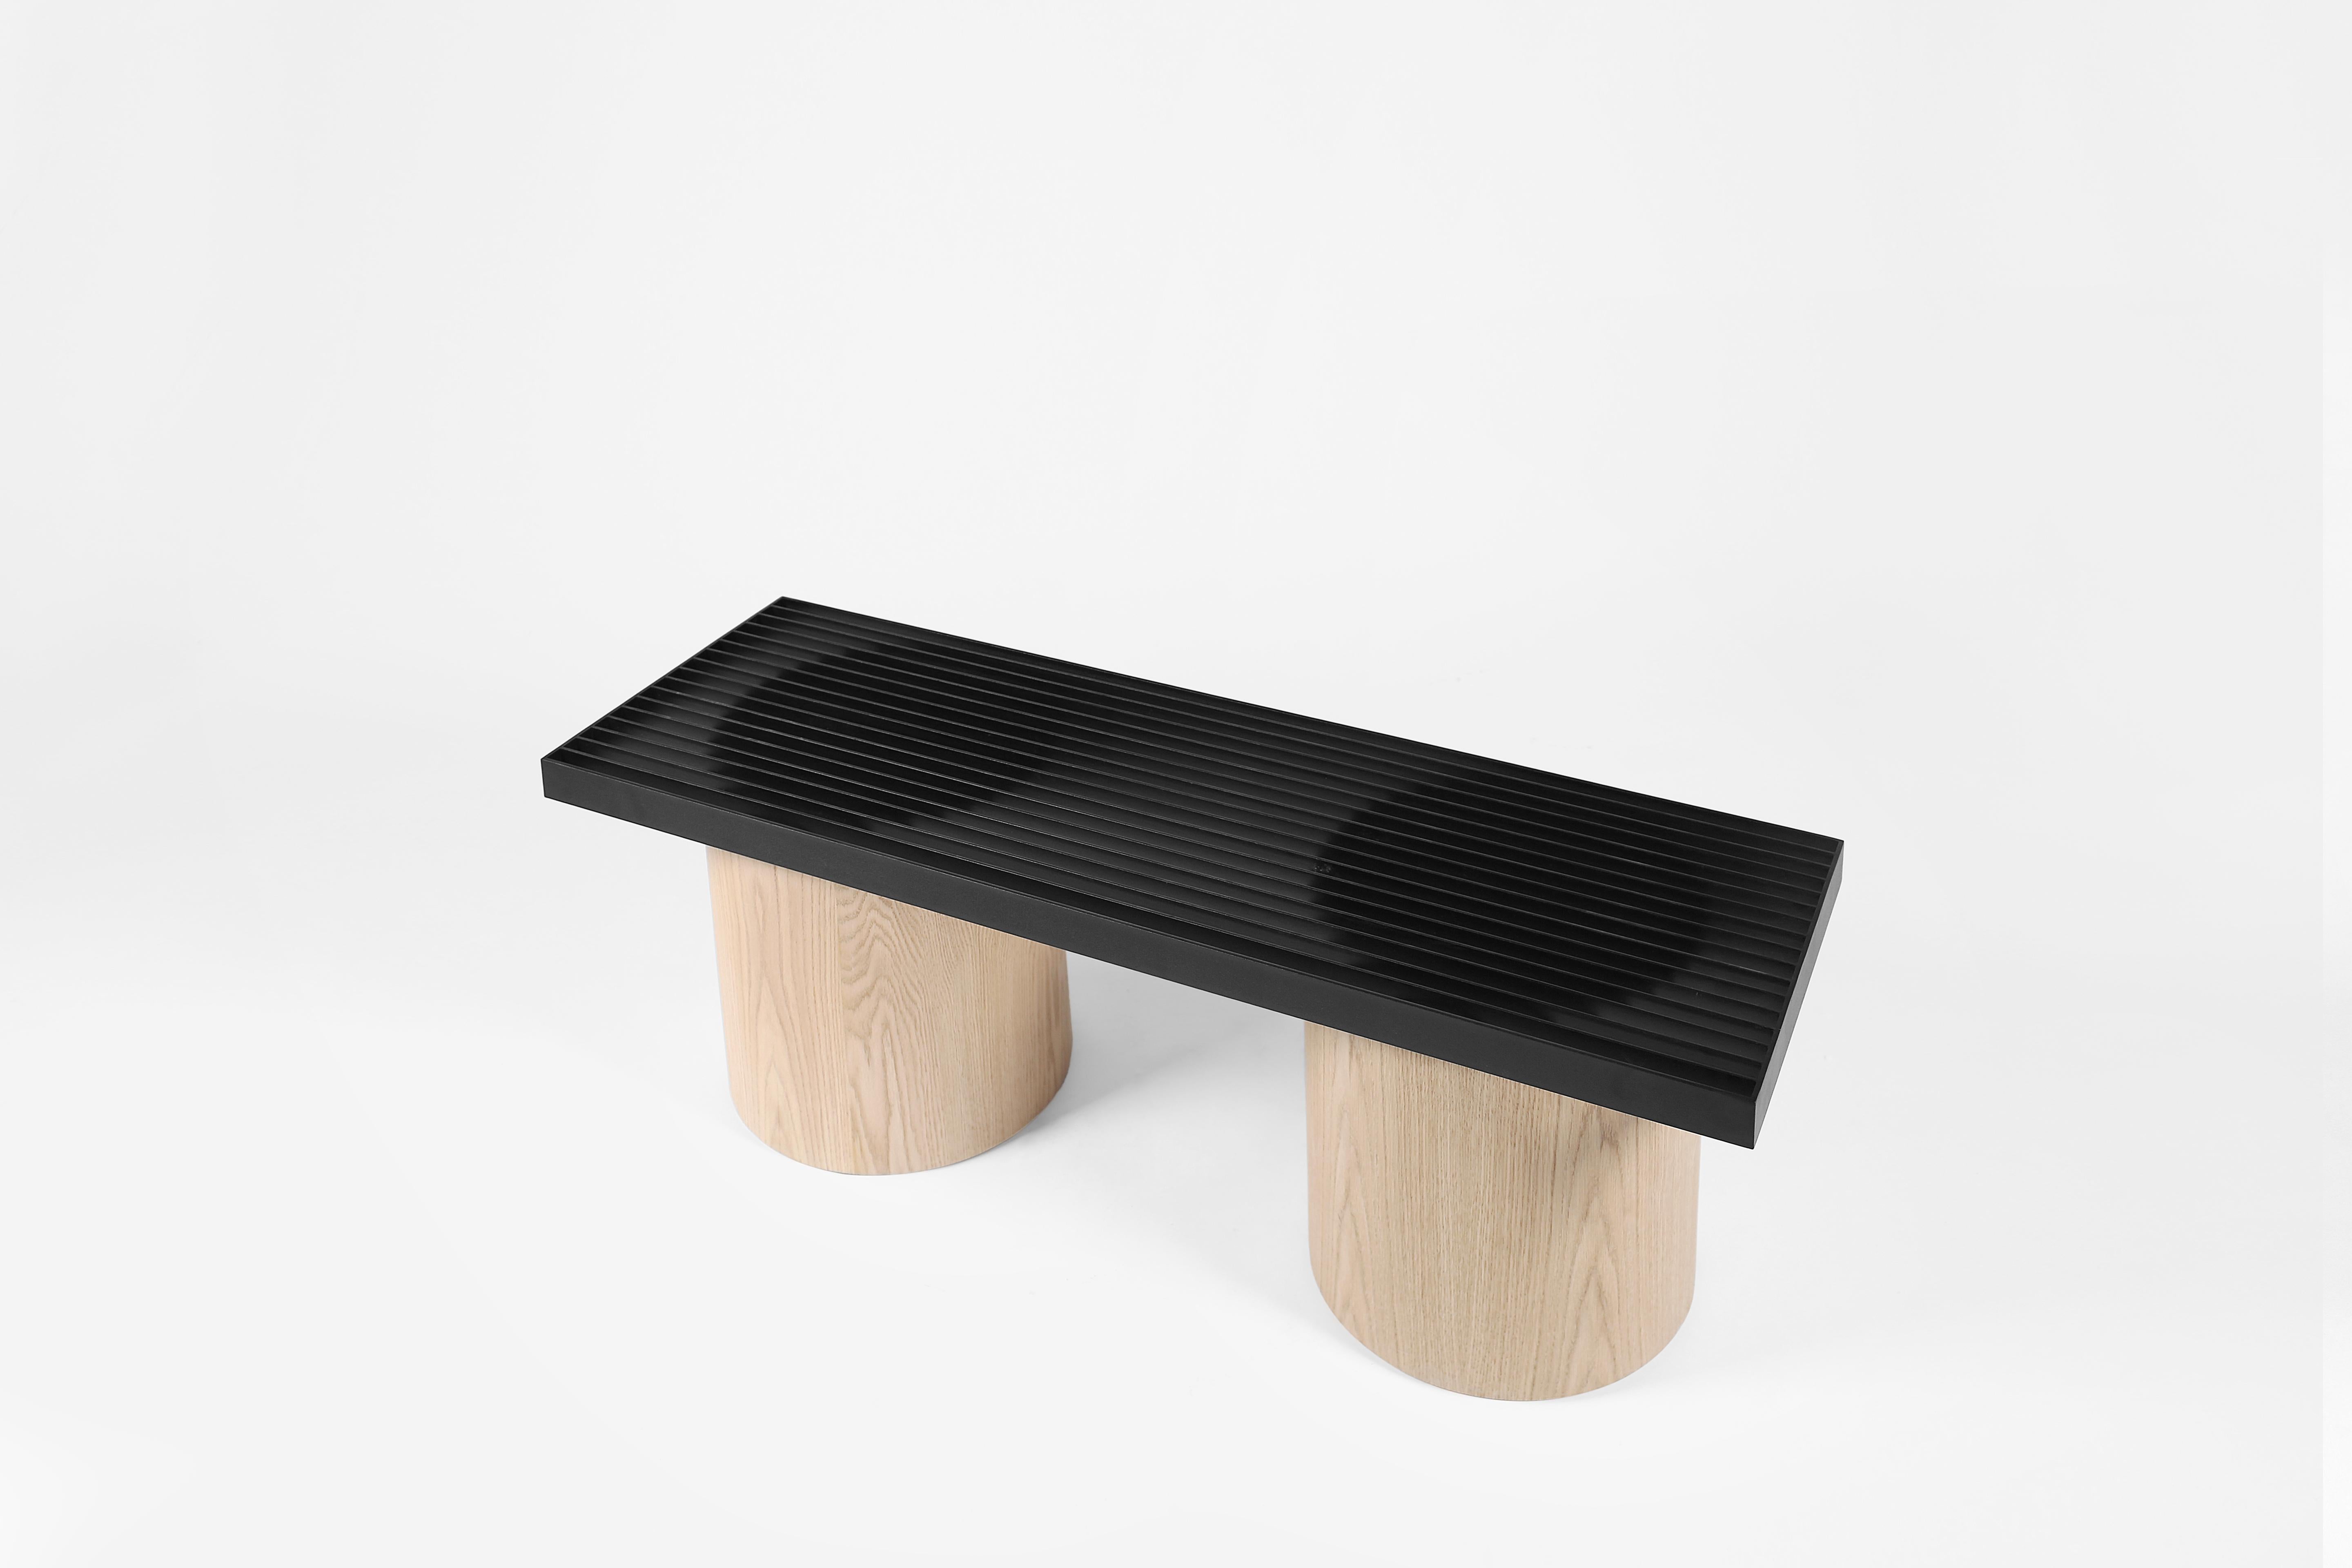 Movimiento bench by Joel Escalona
Limited Edition of 9
Dimensions: D 40 x W 120 x H 45 cm
Materials: oak wood, metal.

White oak veneer with metal cover bench.

Joel Escalona
He was born in Mexico City and studied Industrial Design at the